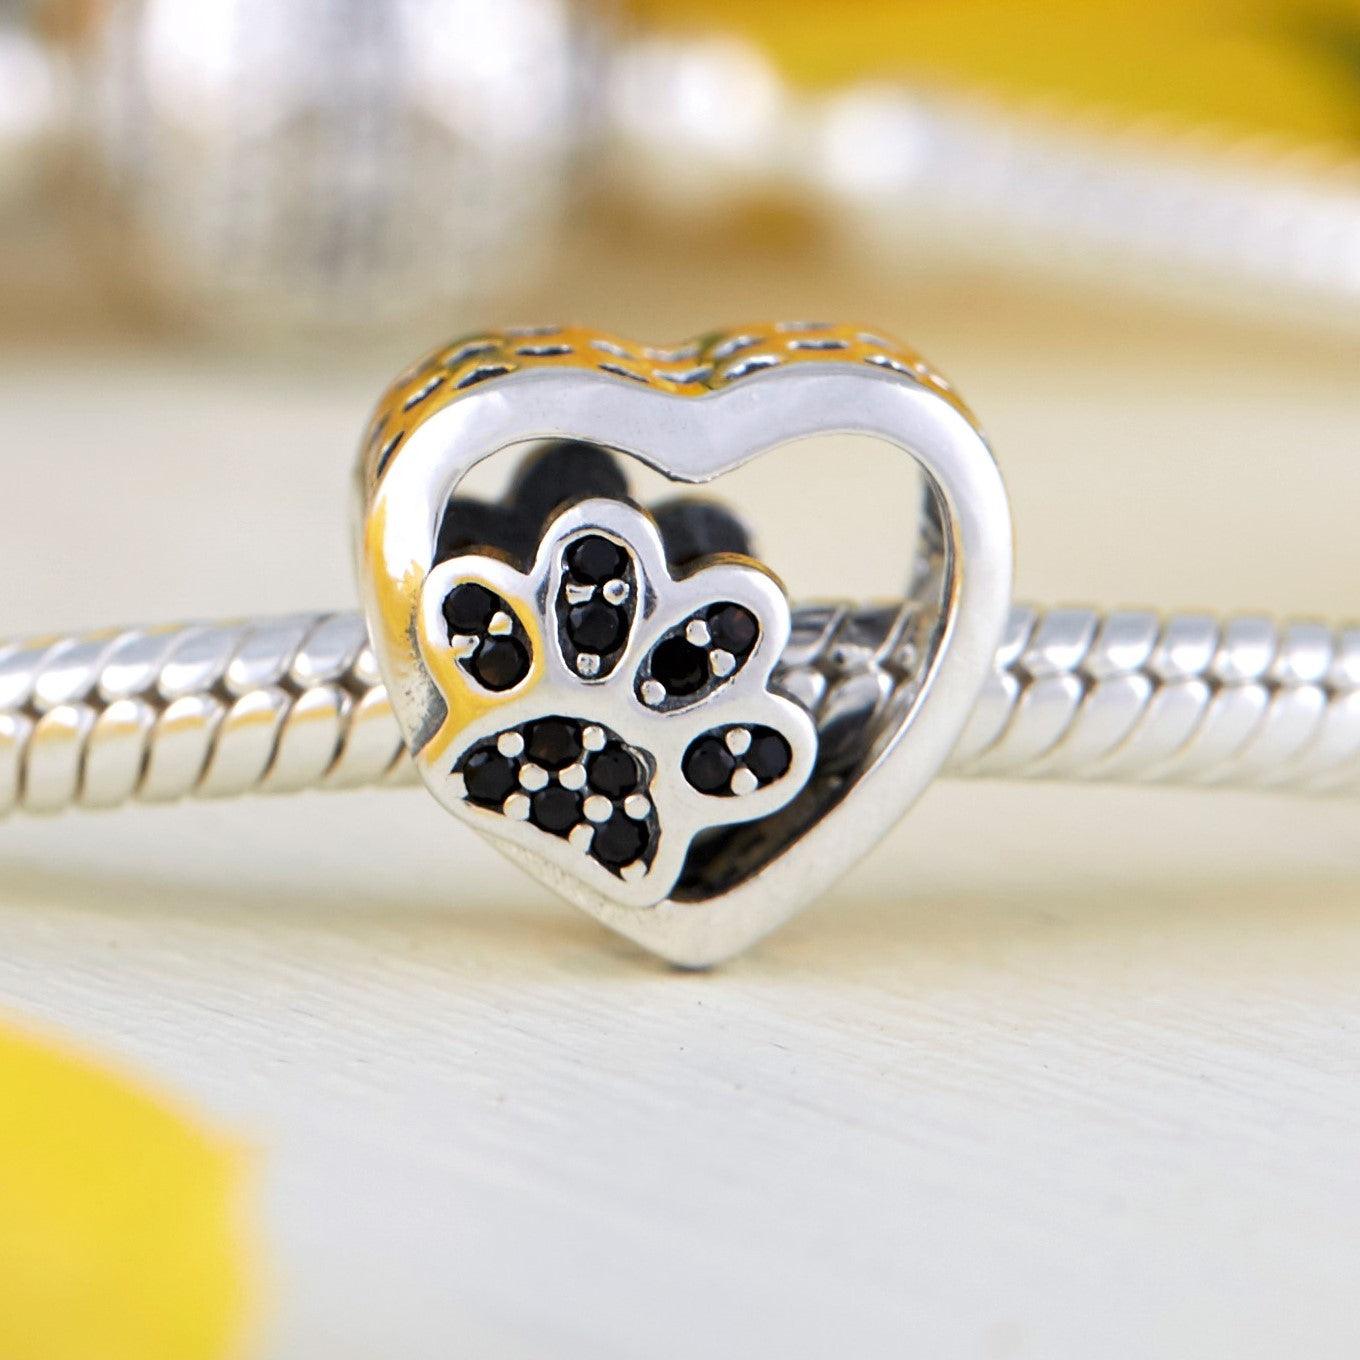 Paw Charm- 925 Sterling Silver with black Cubic Zircons, a cute heart charm with a paw at its center is a must for pet lovers